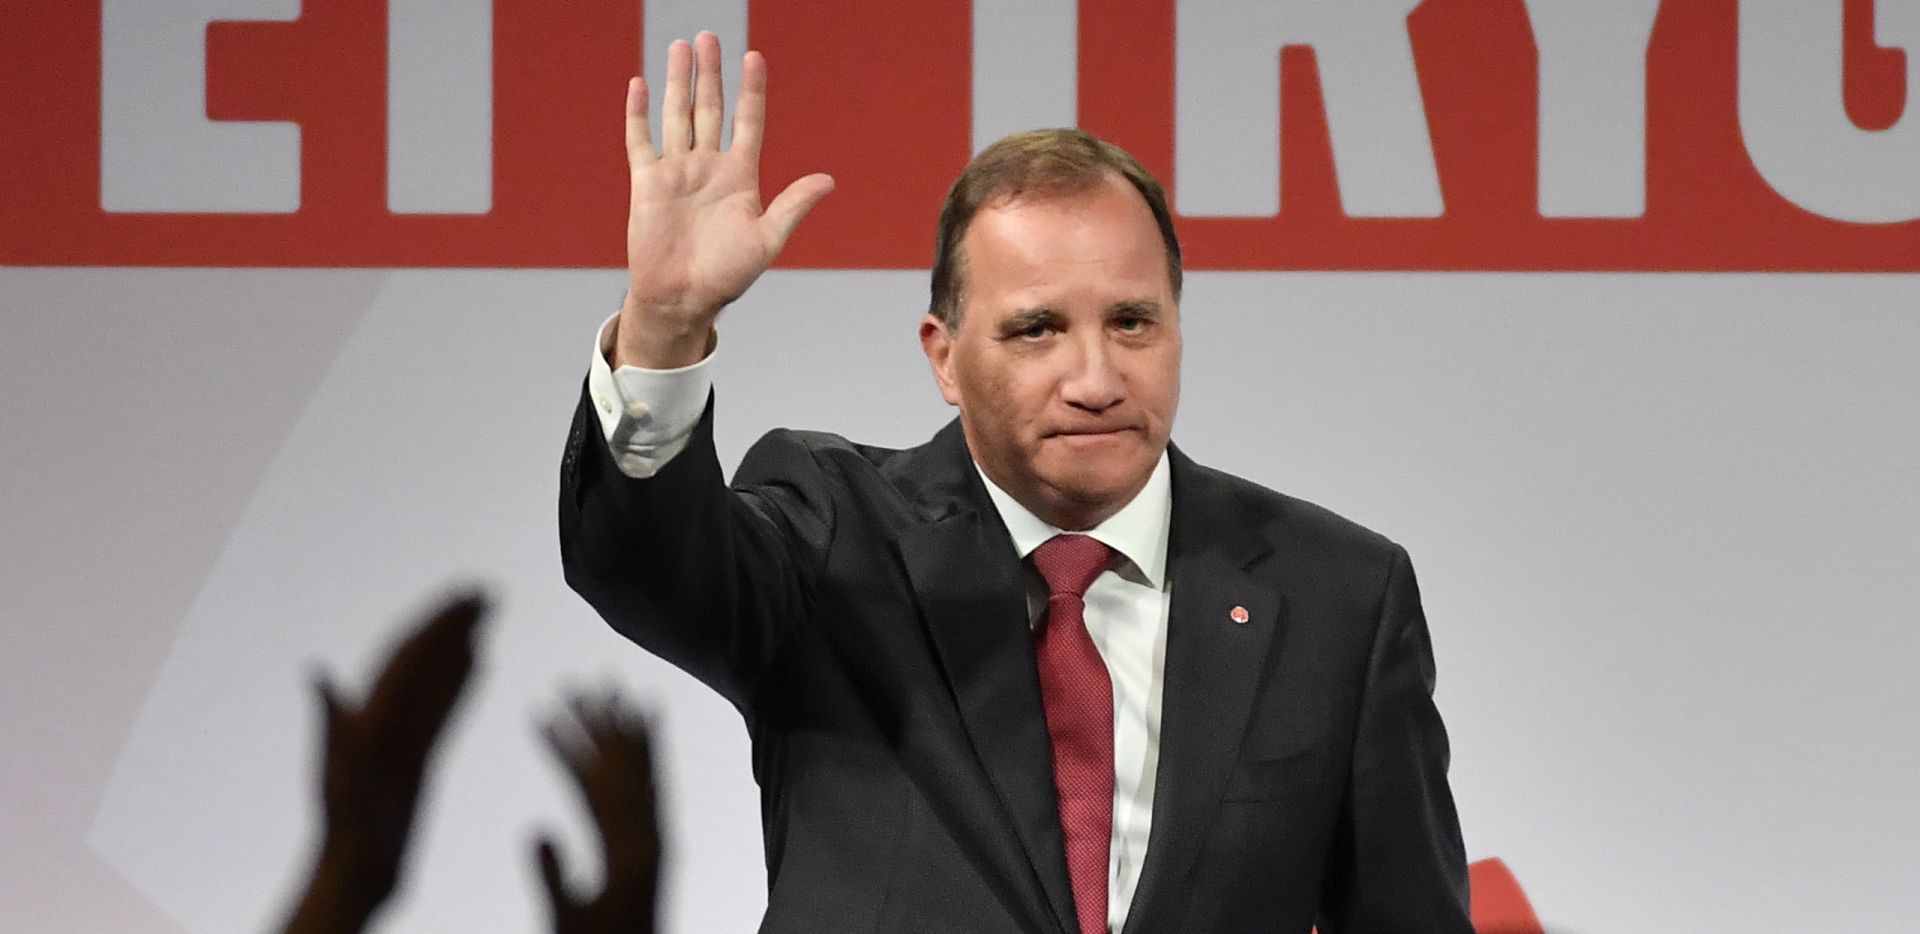 epa07009258 Prime minister and party leader of the Social democrat party Stefan Lofven speaks at the election party at the Fargfabriken art hall in Stockholm, Sweden 09 September 2018.  EPA/Jonas Ekstromer  SWEDEN OUT